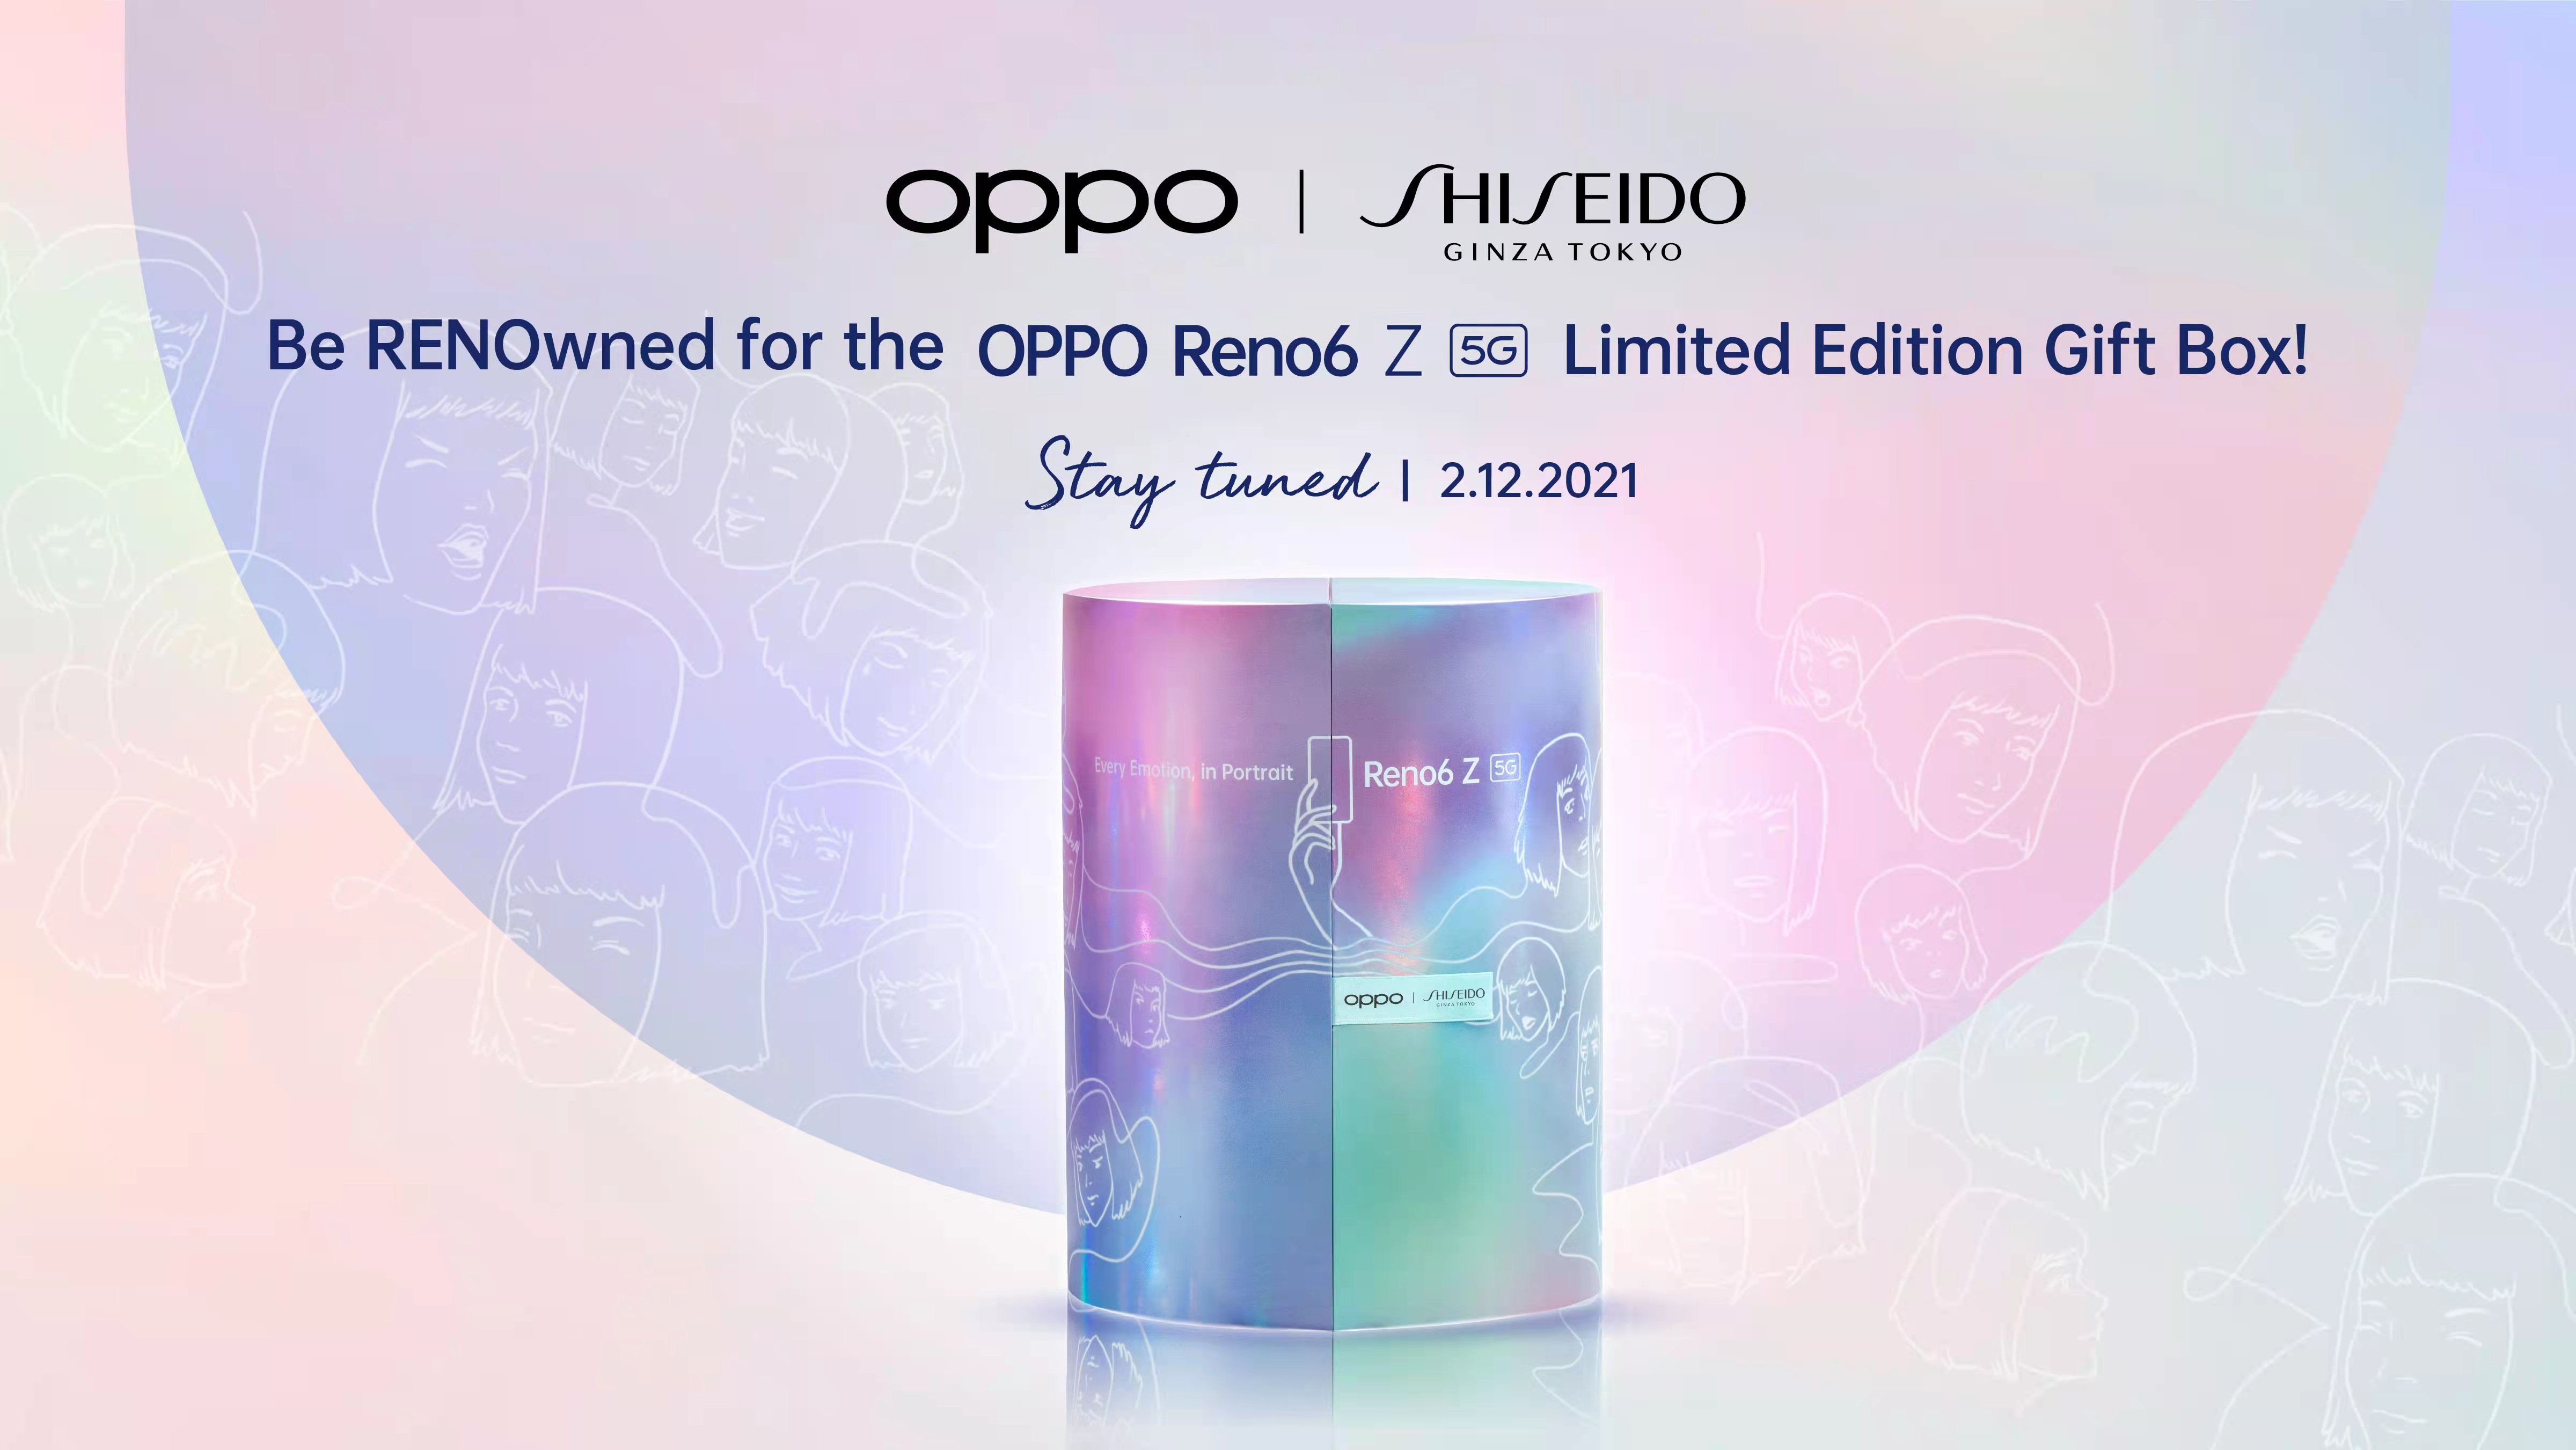 OPPO Collaborates with Shiseido for the Perfect Year End Gift